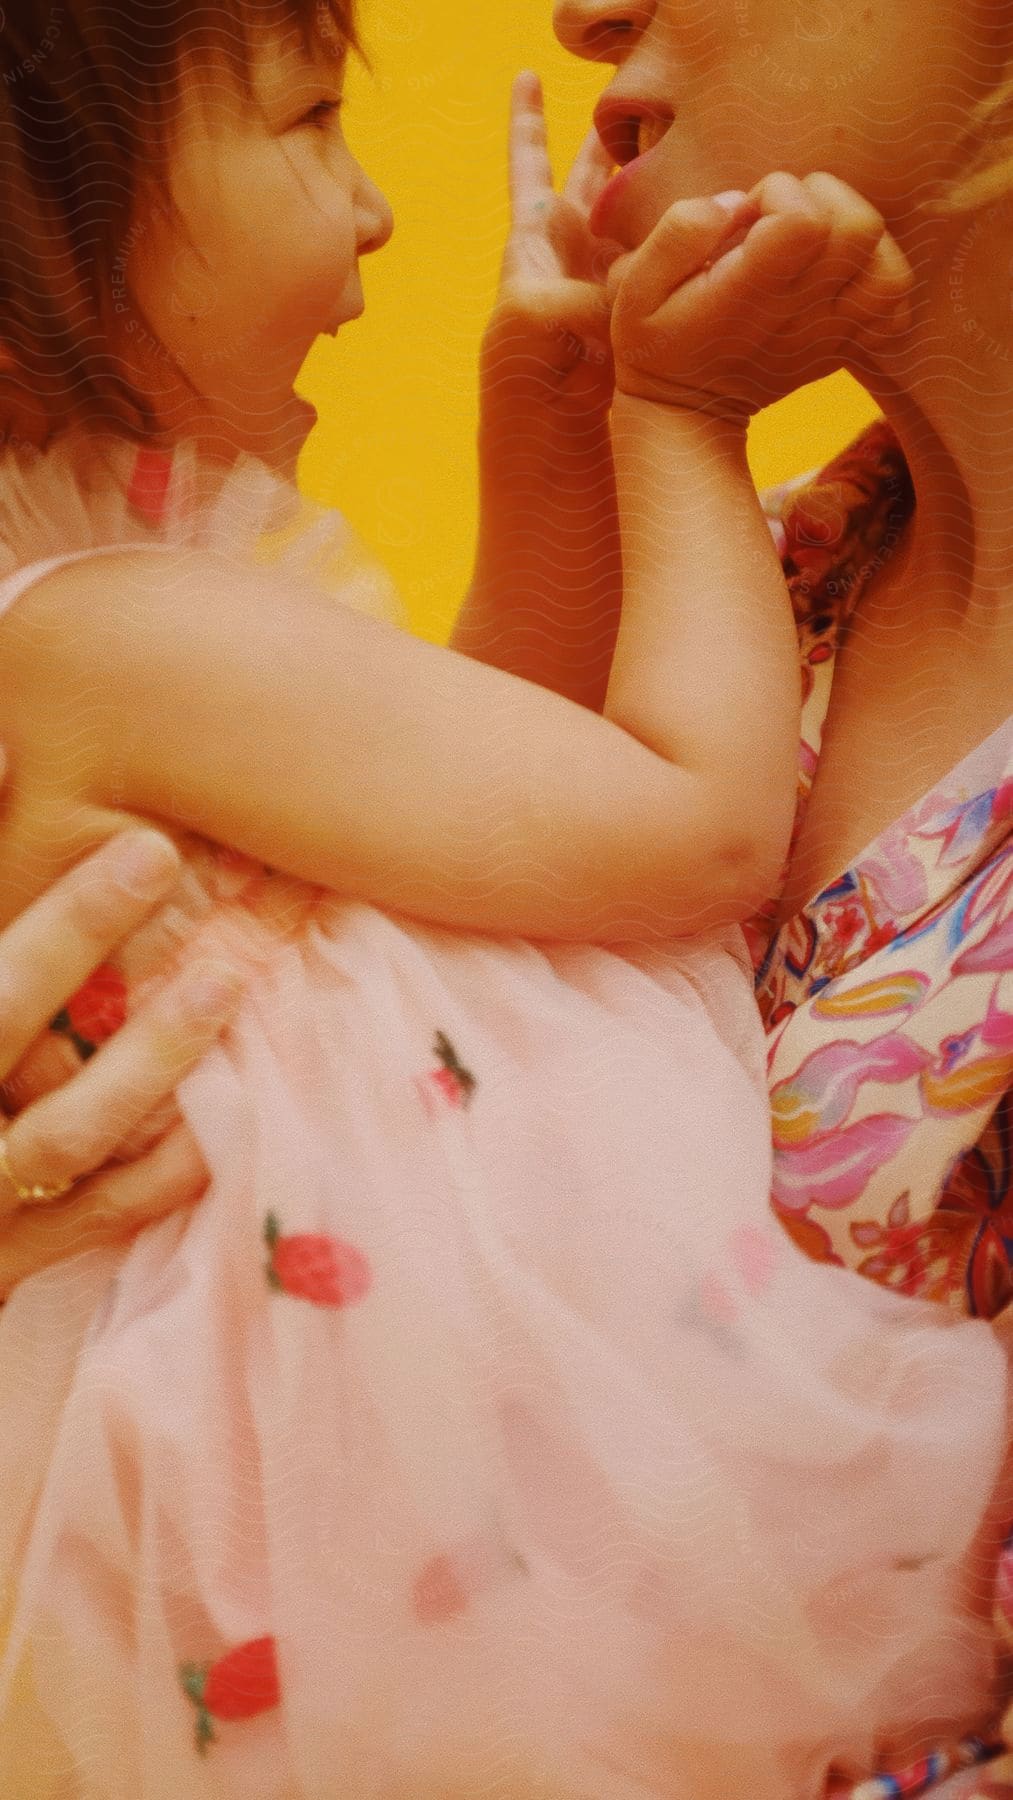 Mother holding her daughter who is wearing a printed dress and looking at each other smiling against a vibrant yellow background.